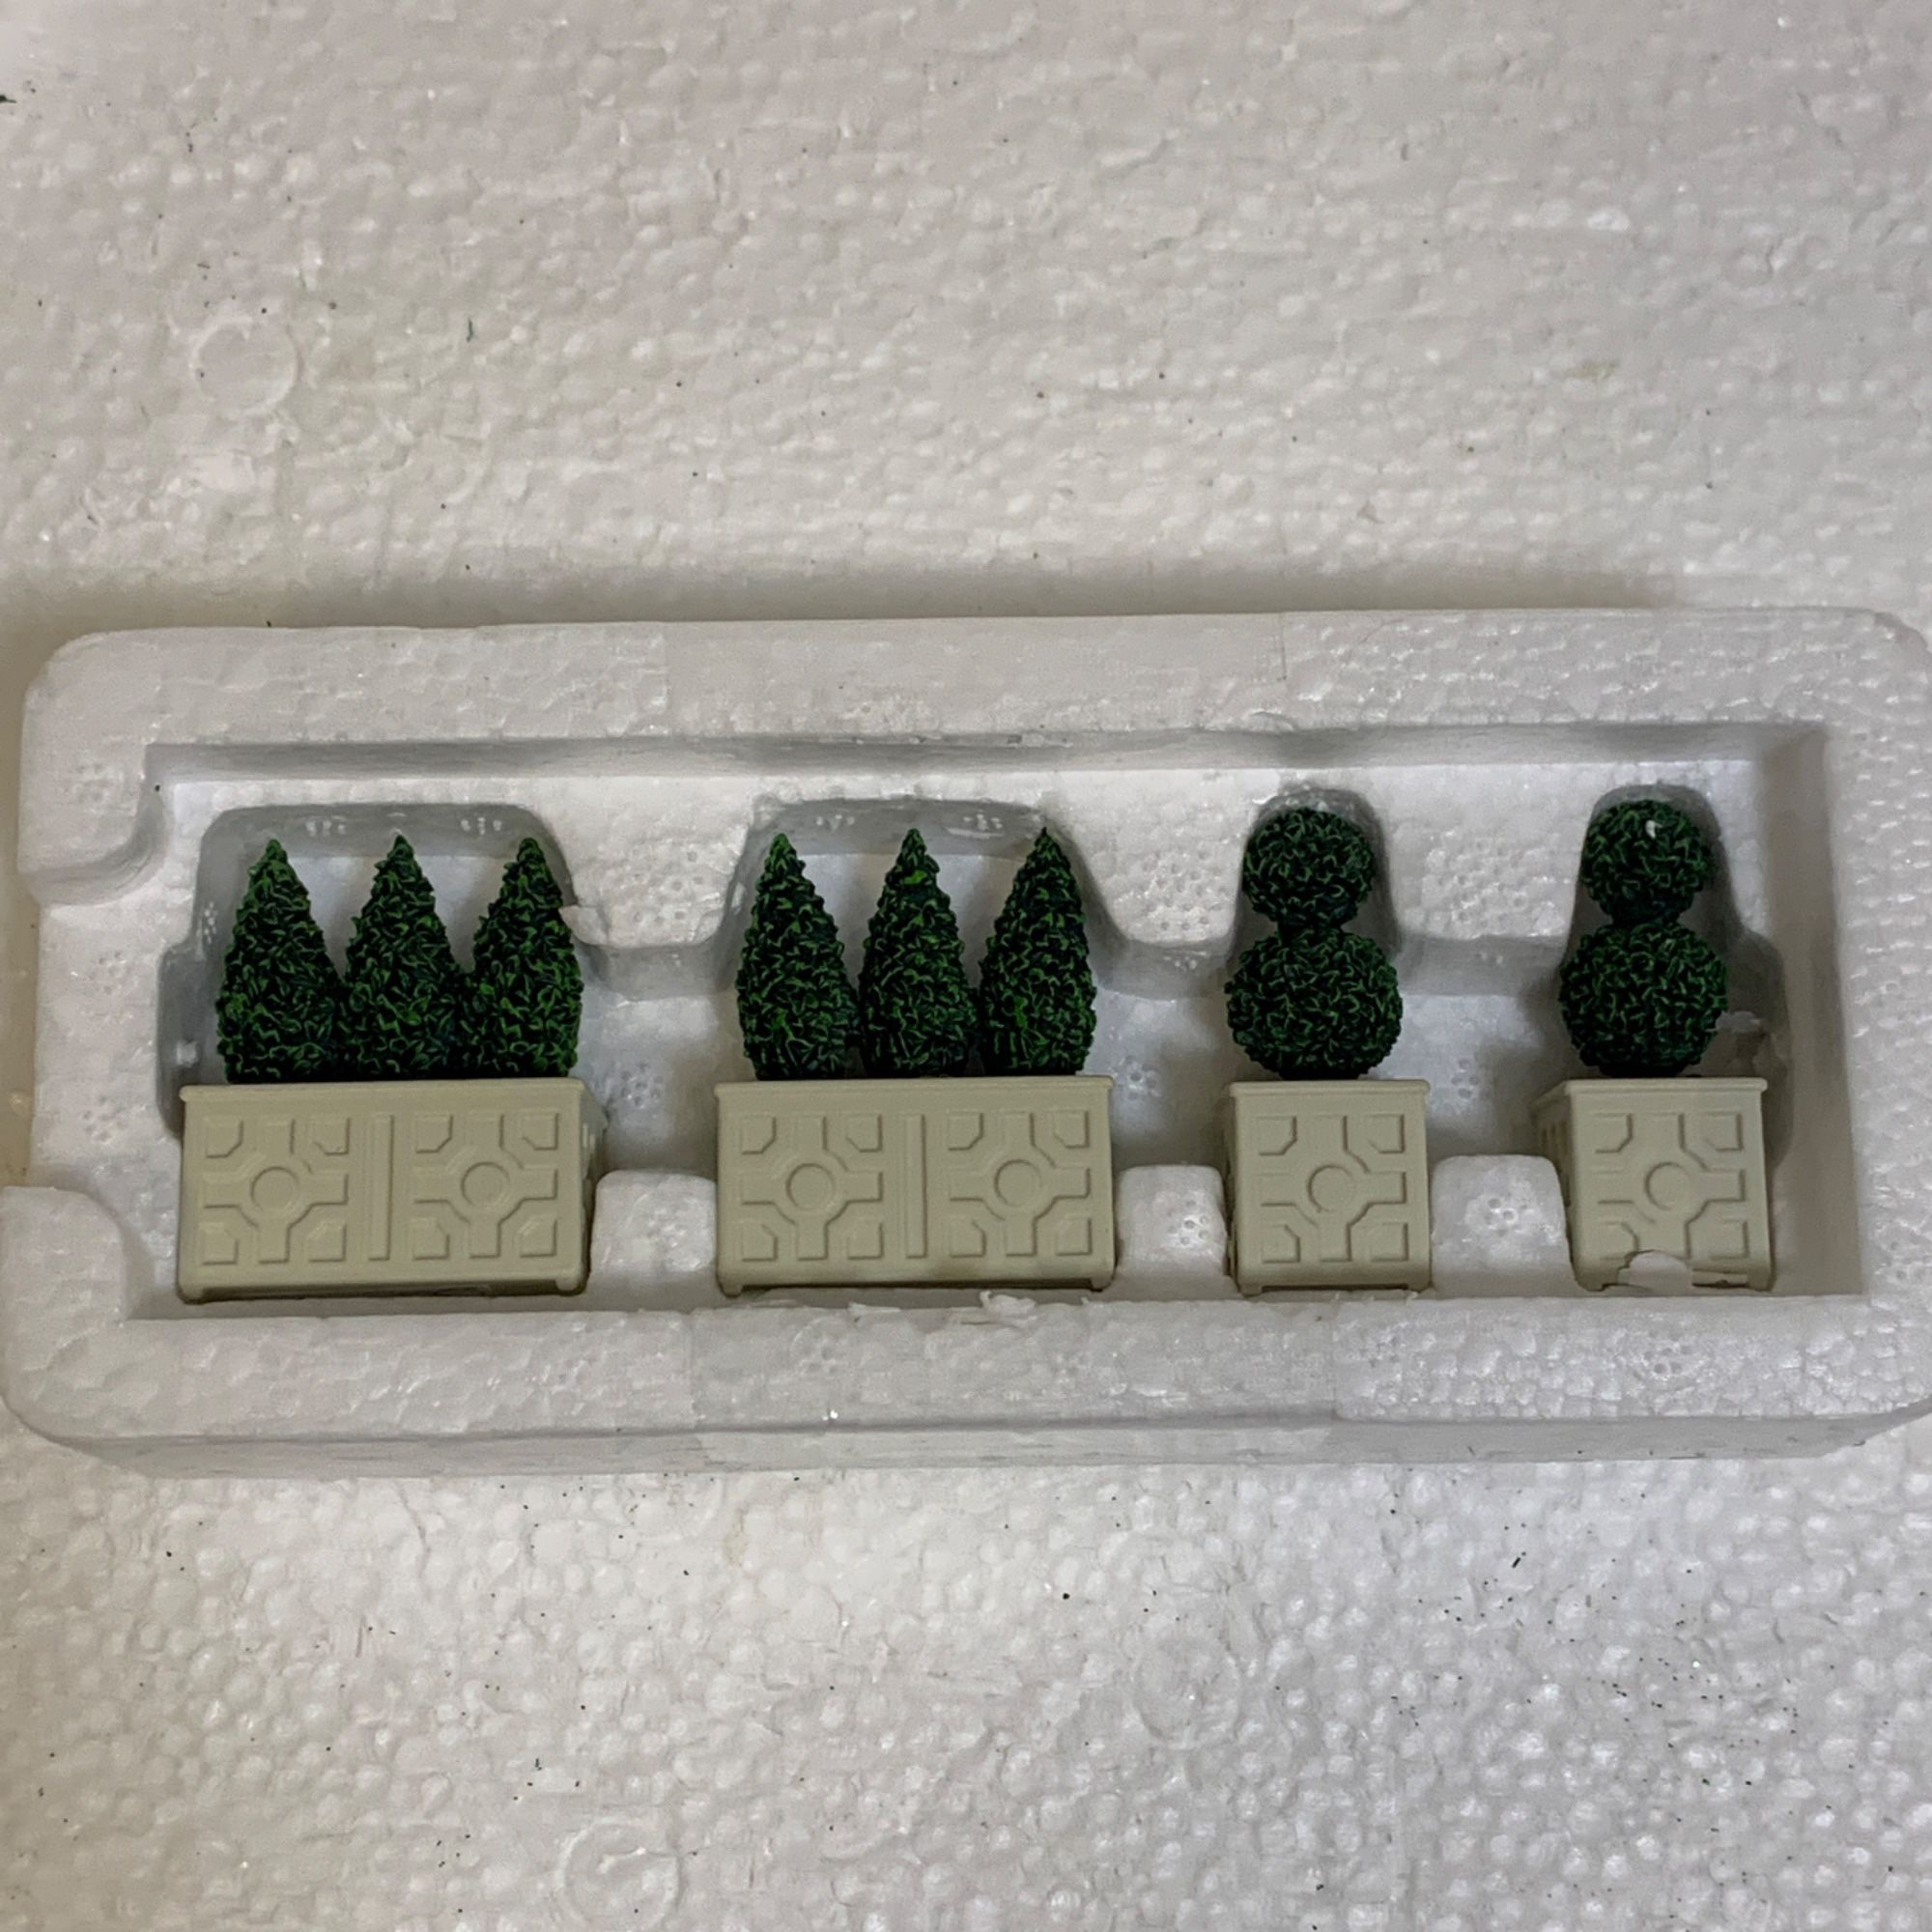 Department 56 Seasons Bay Planter Box Topiaries Village Accessory from 1998